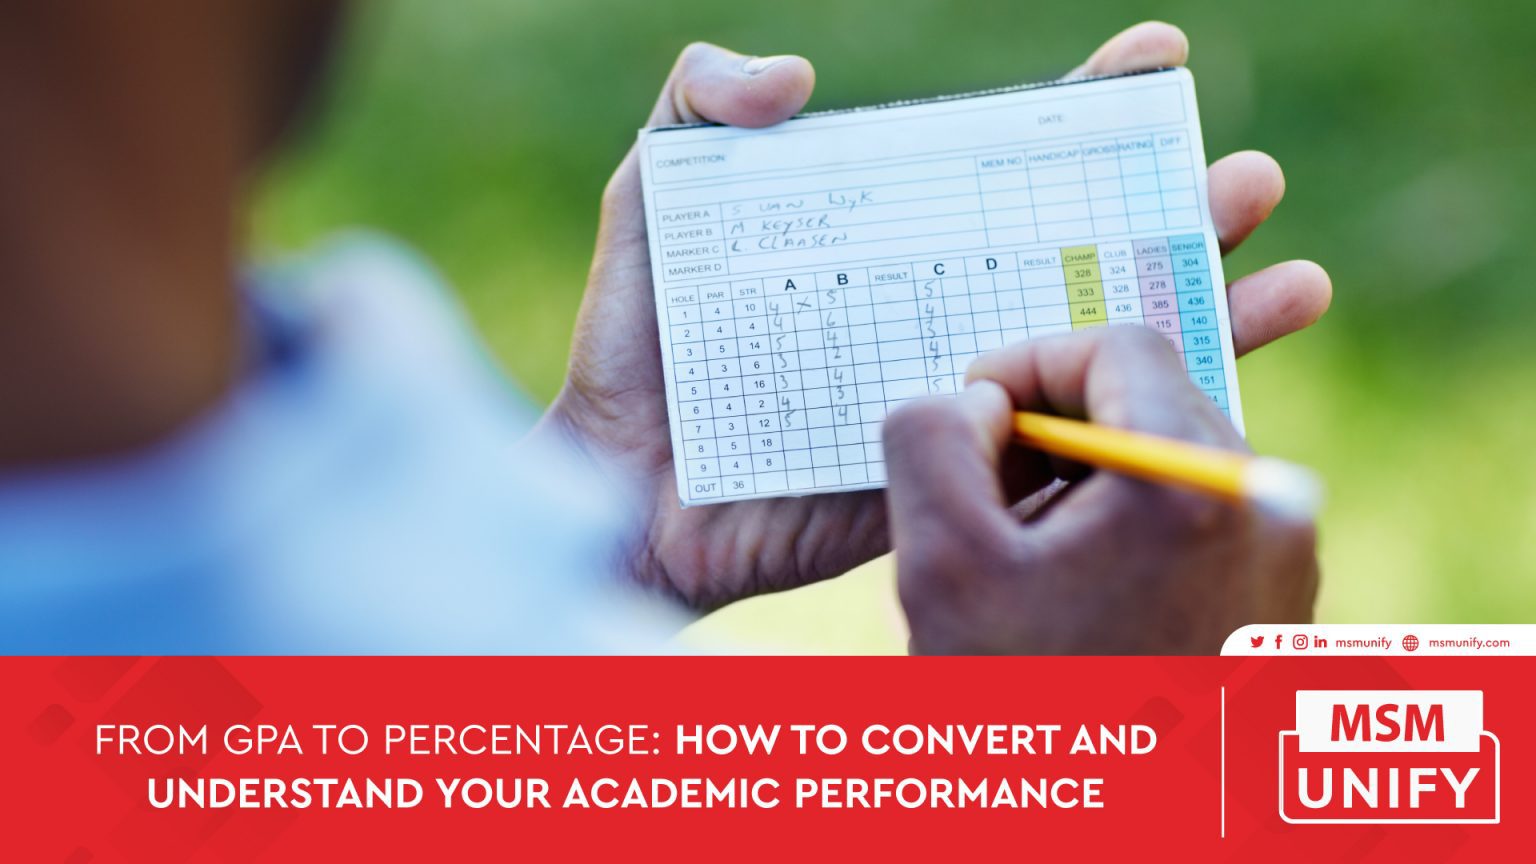 How to convert and understand your academic performance